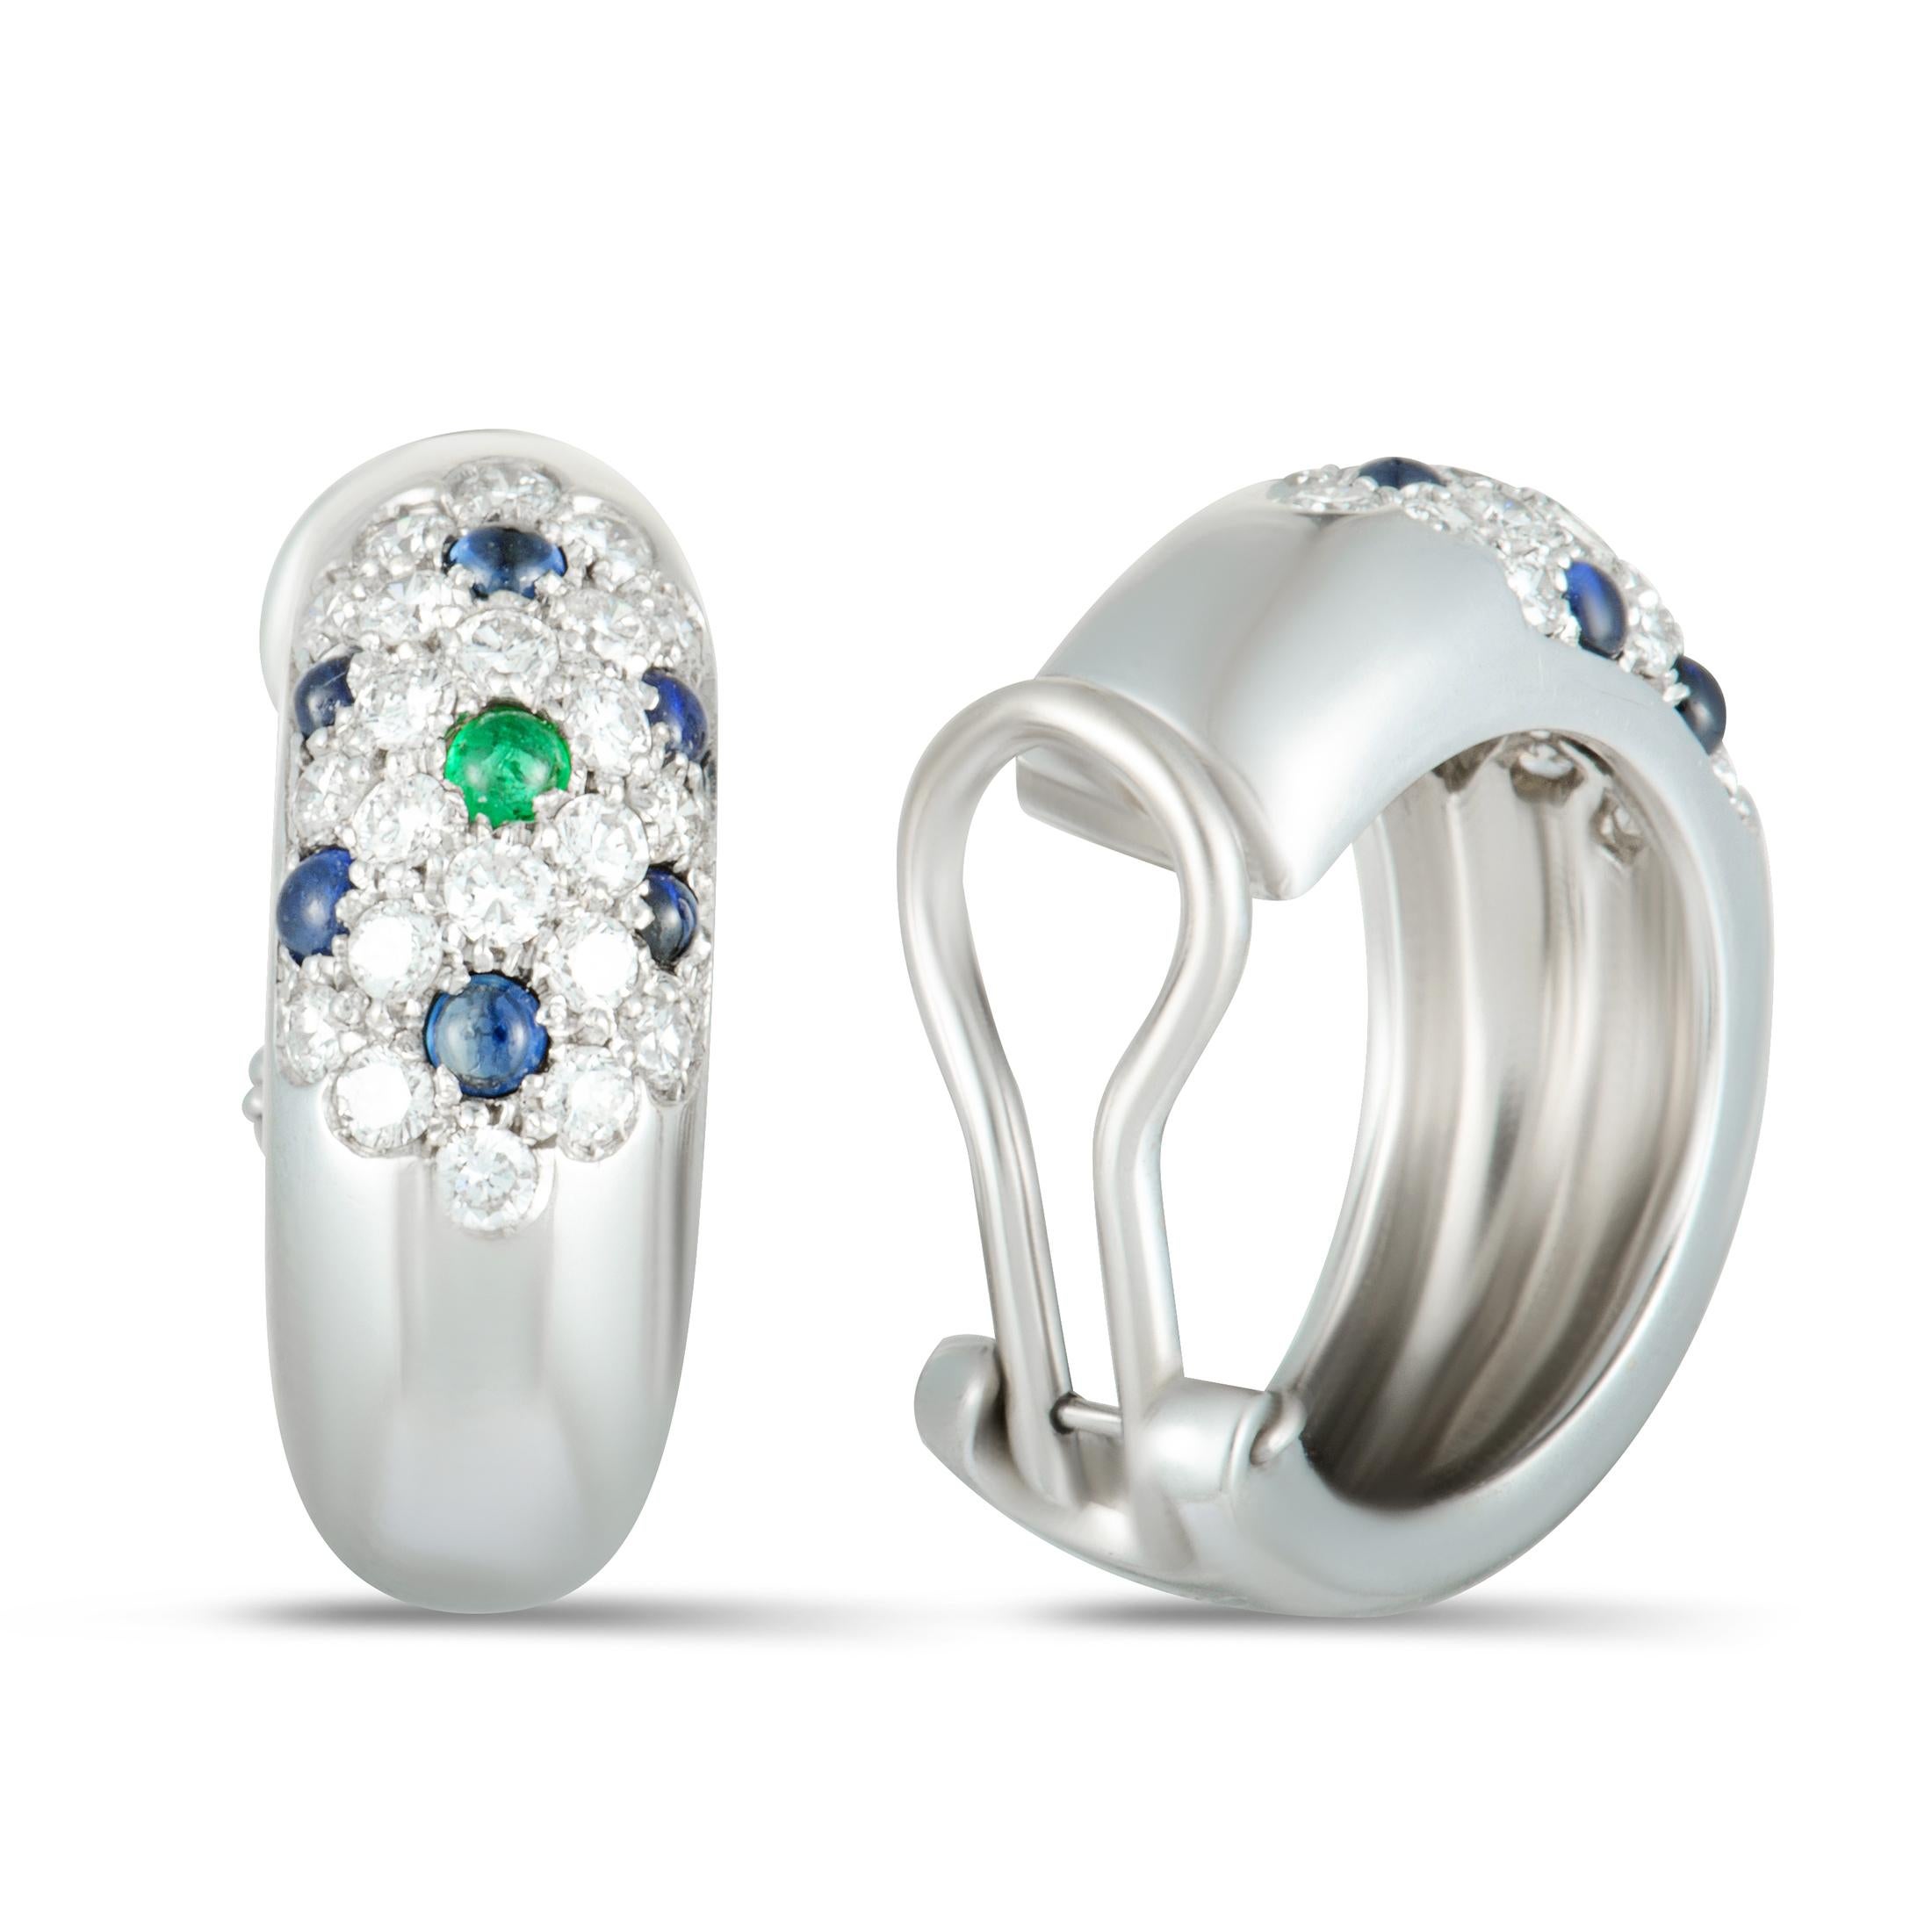 This elegant pair of earrings is beautifully designed by Cartier as part of its stunning Panthere collection. The remarkably classy pair is elegantly designed with shimmering 18K white gold and set with sparkling diamonds, fabulous sapphires, and